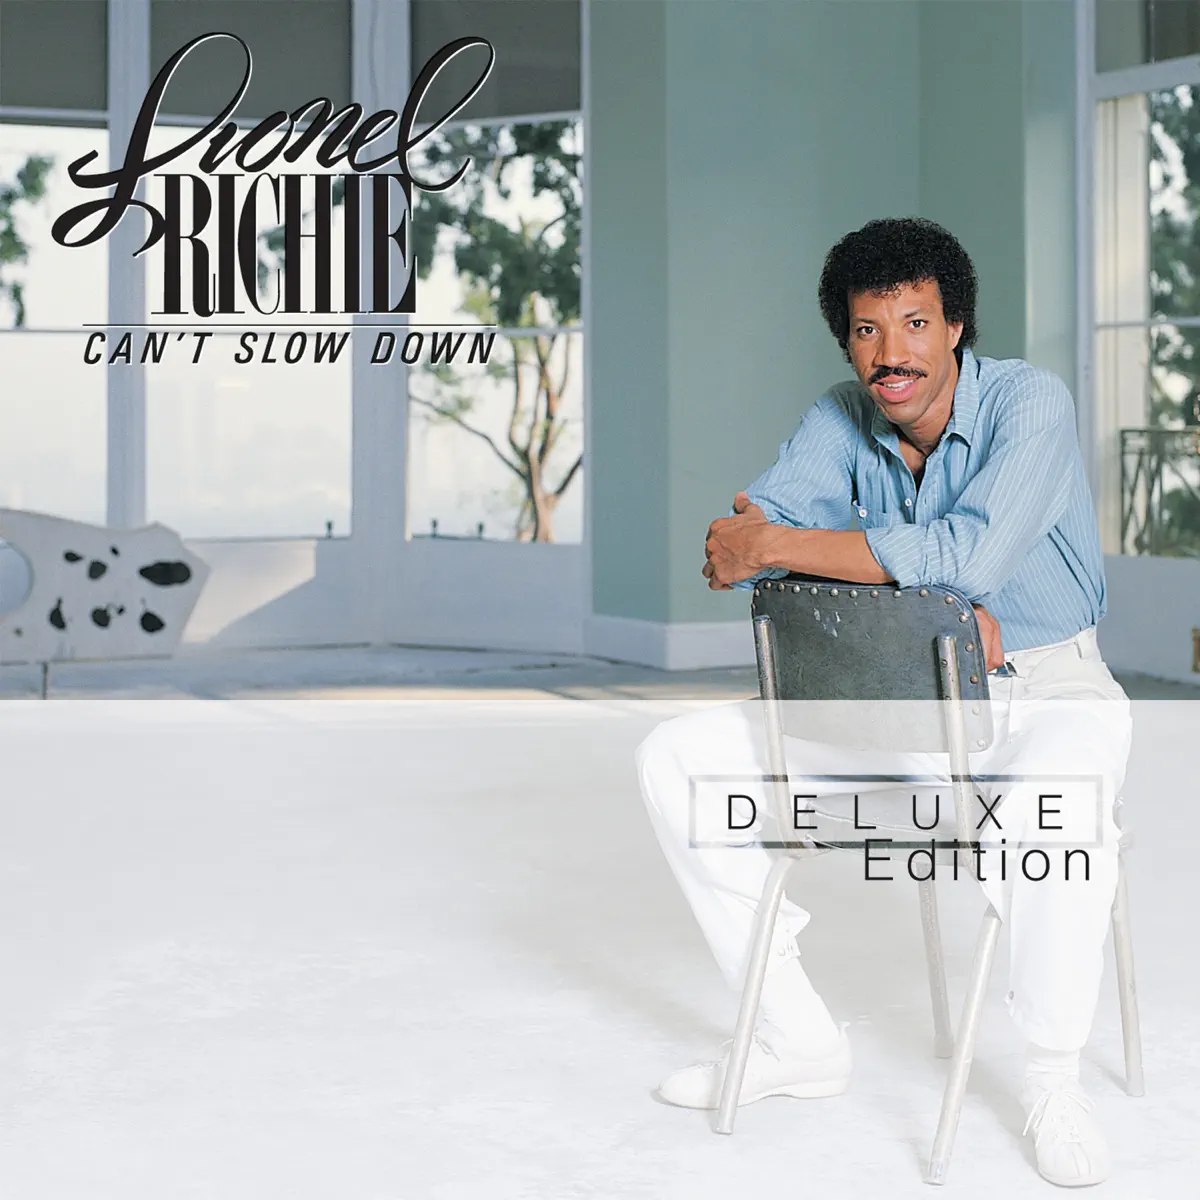 Lionel Richie - Can't Slow Down (Deluxe Edition) (1983) [iTunes Plus AAC M4A]-新房子